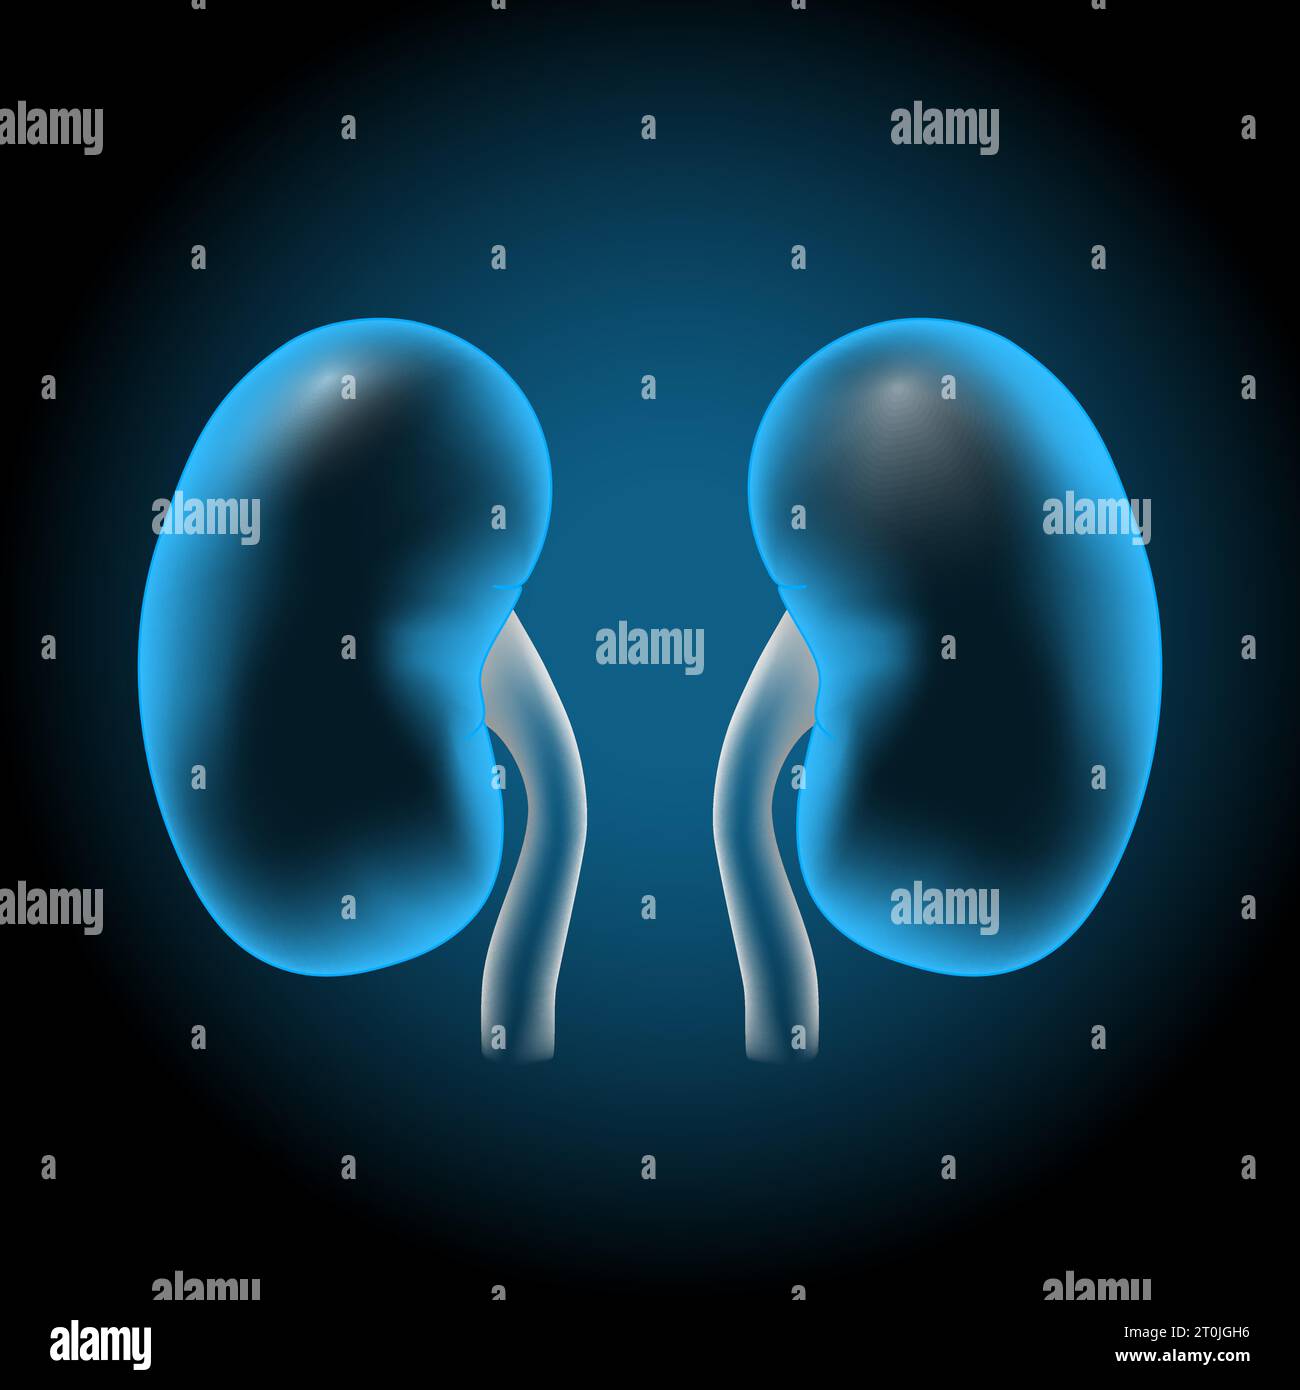 kidneys with glowing effect. Realistic transparent blue kidney on dark background. Human urinary System. Image for healthcare design. Renal Function. Stock Vector